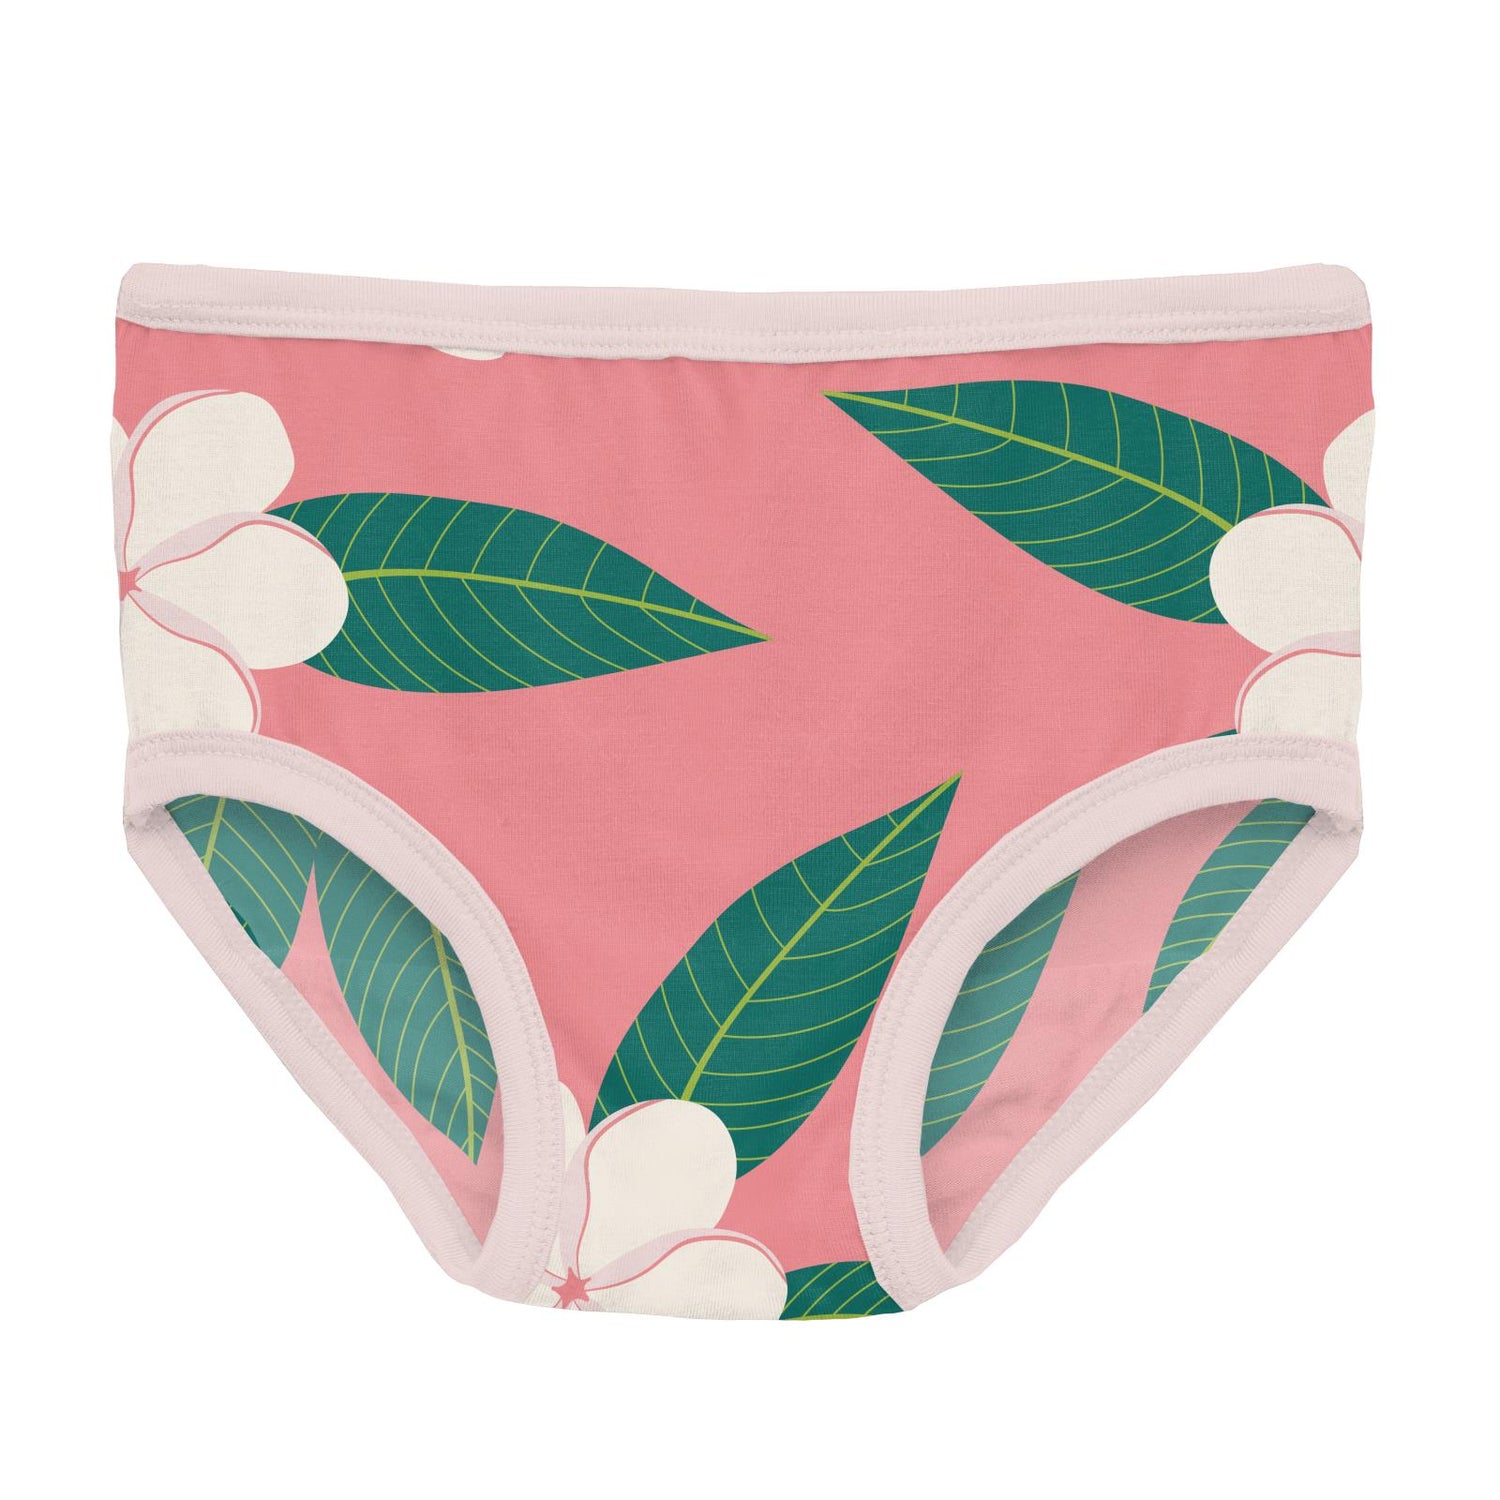 Print Underwear Set of 3 in Strawberry Pineapples, Strawberry and Strawberry Plumeria